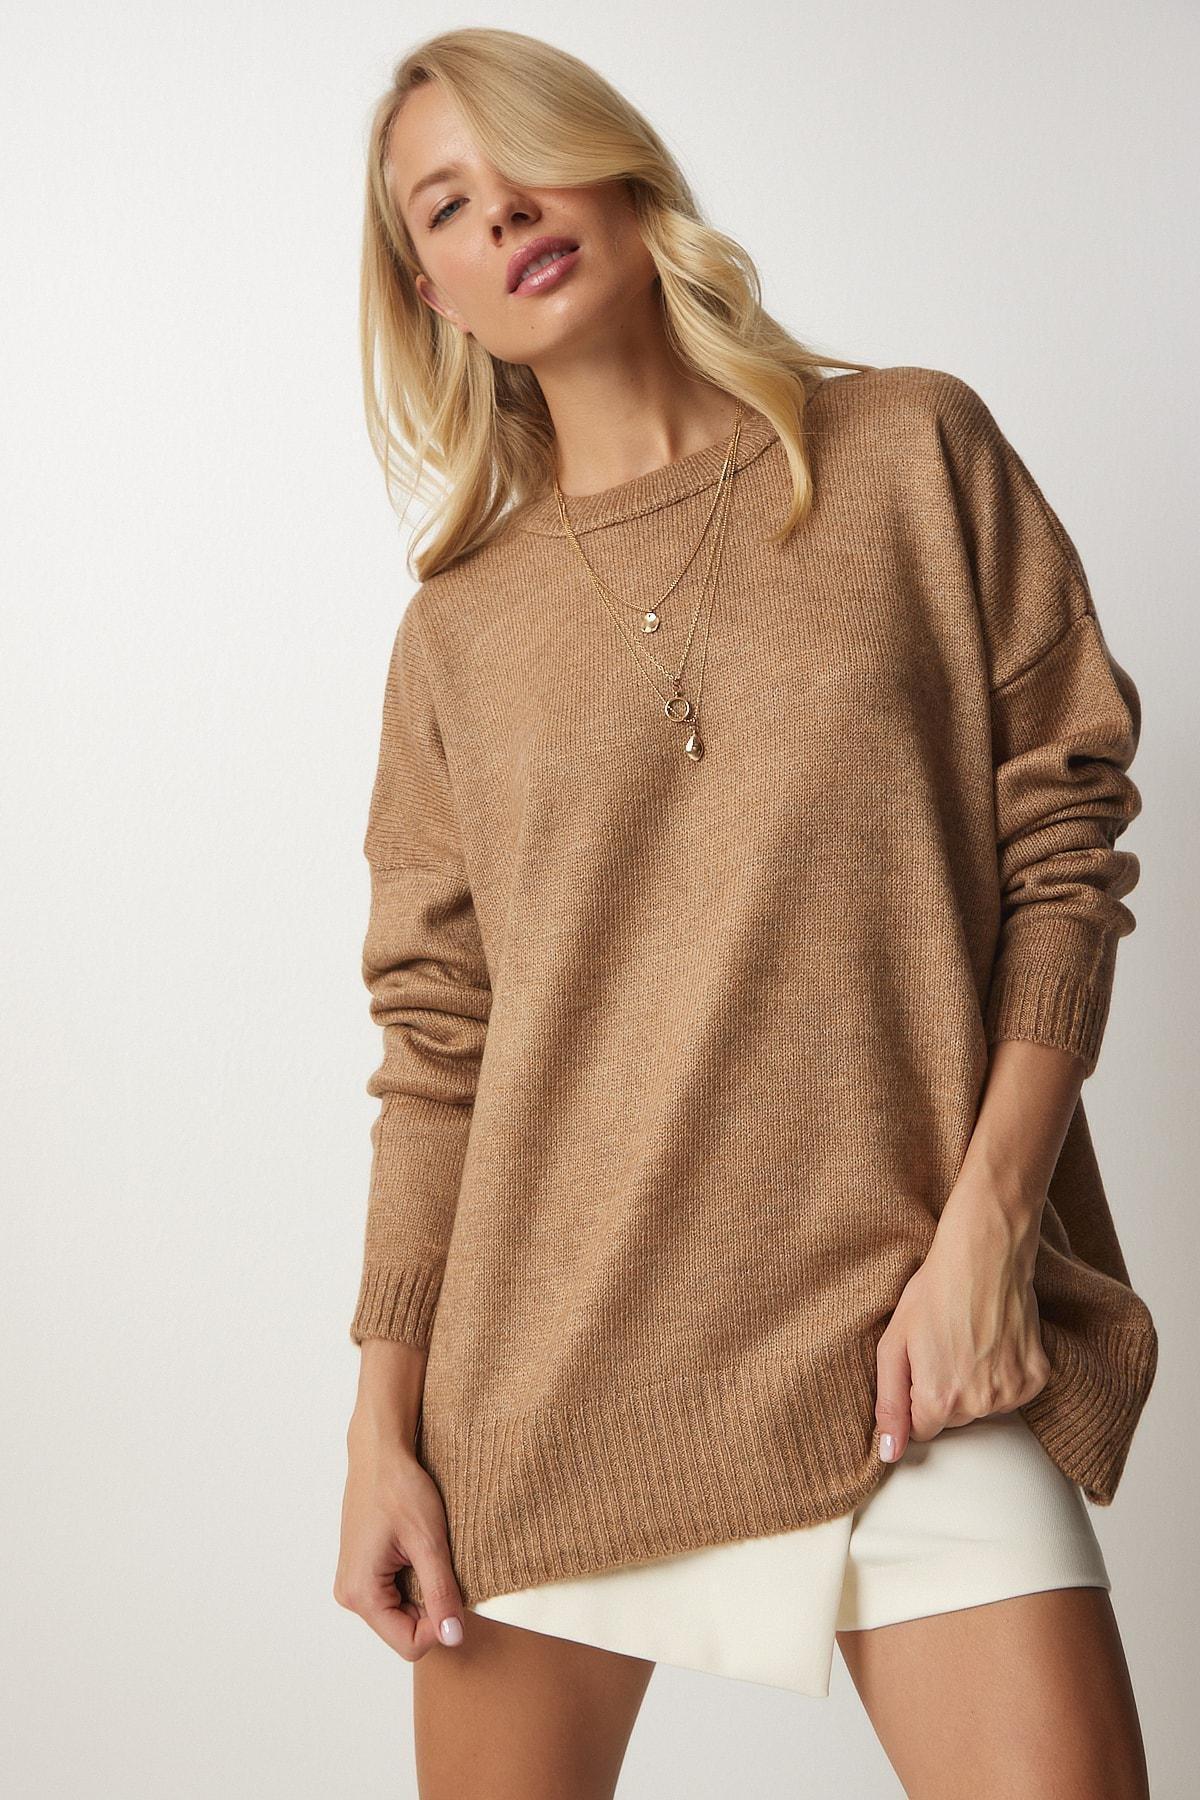 Happiness Istanbul - Brown Crew Neck Oversized Knitwear Sweater